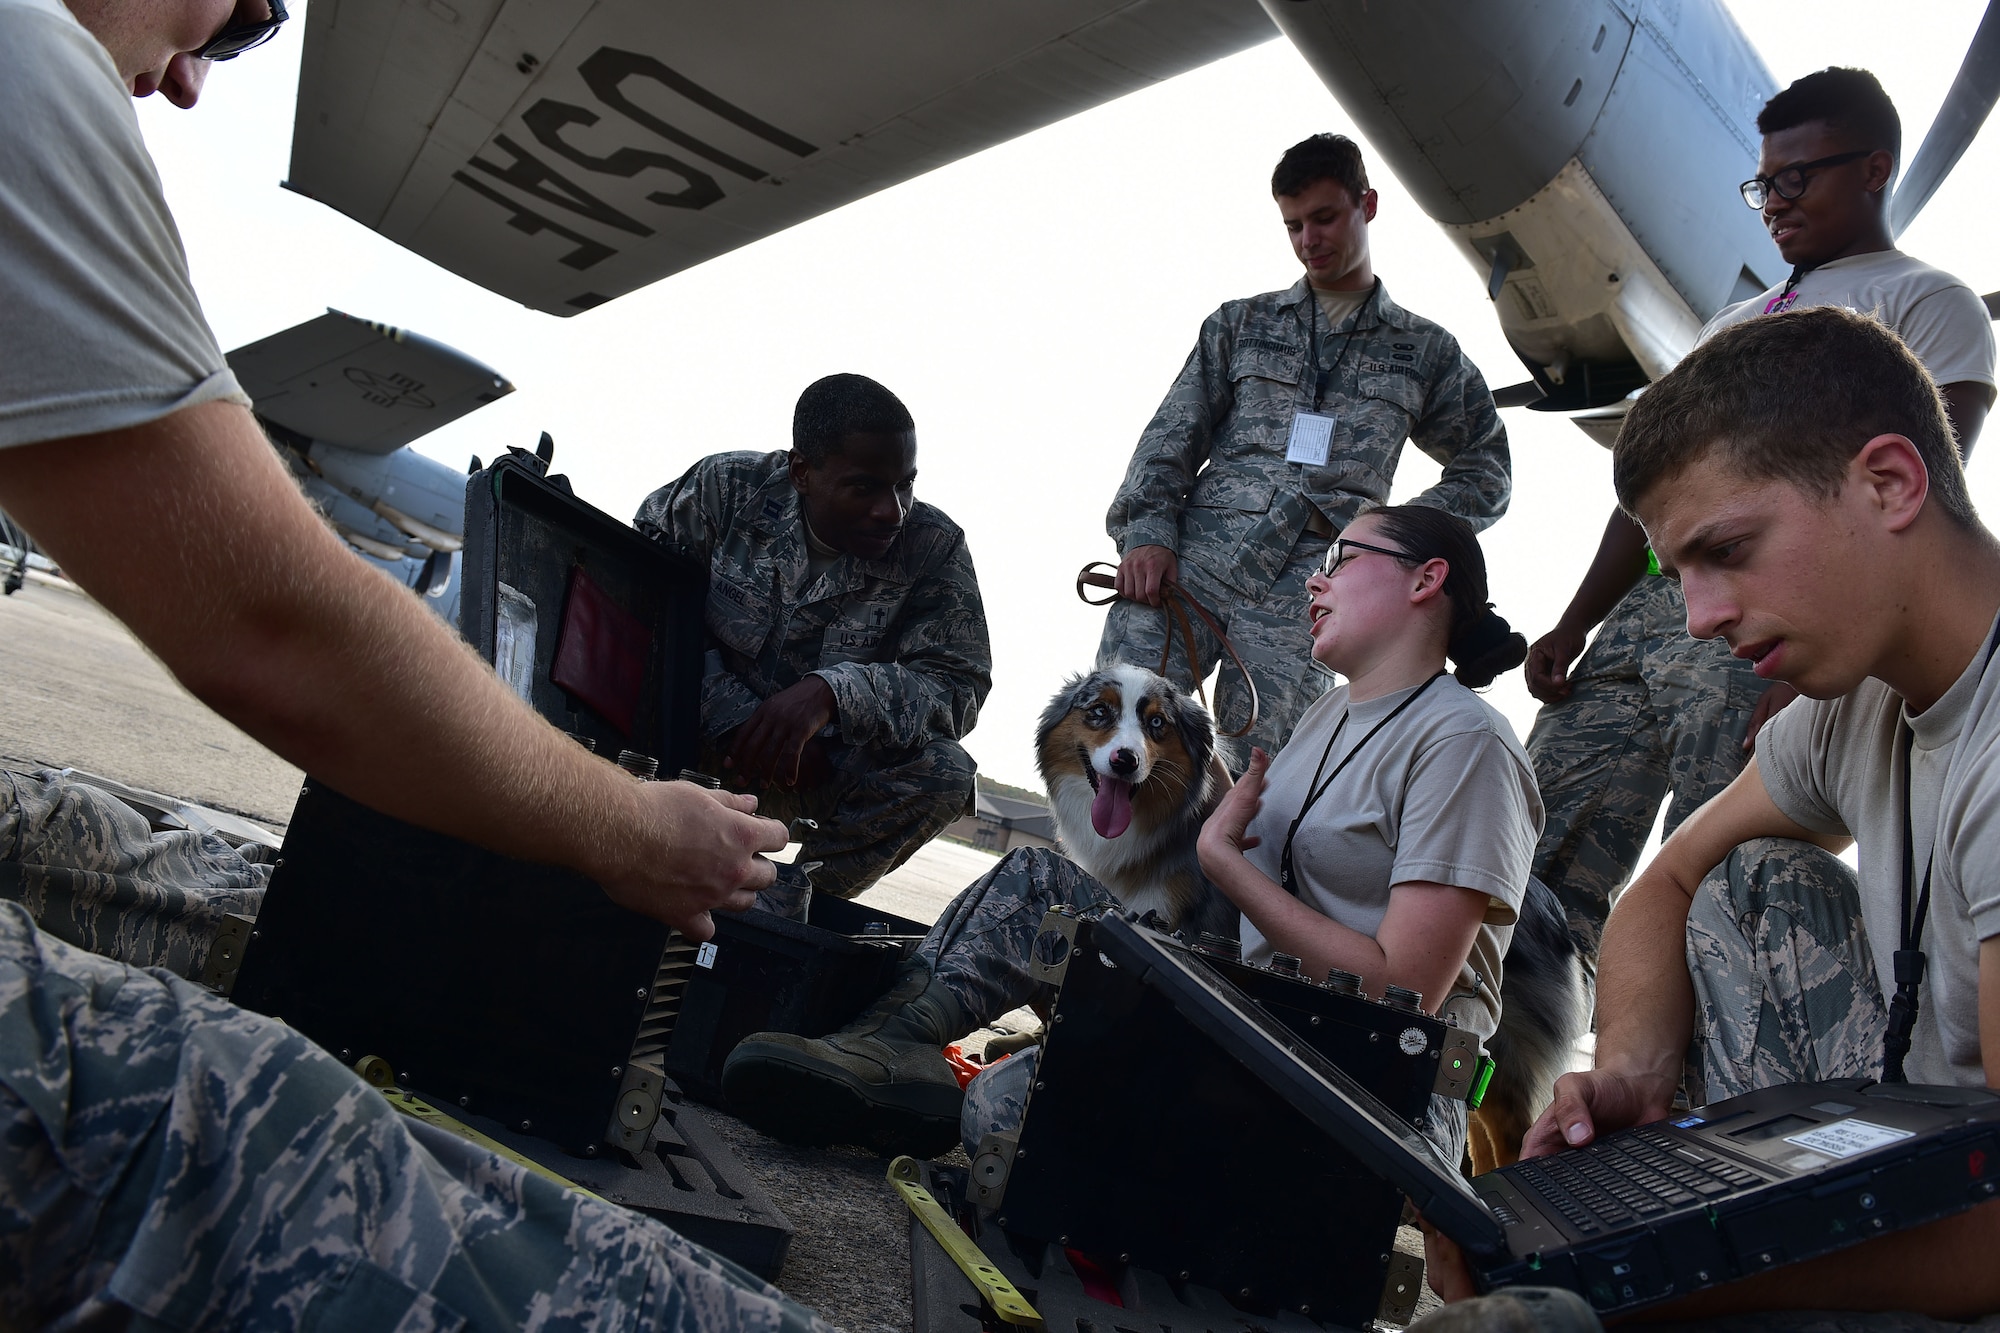 Chaplain Capt. Eglon Angel, 19th Airlift Wing chaplain, and Staff Sgt. Kolton Rottinghaus, 19th Airlift Wing NCO in charge of plans and programs, engaged members of the 19th Maintenance Squadron Sept. 22, 2017, at Little Rock Air Force Base, Ark. Chapel staff regularly visit different squadrons to get a better idea of any obstacles Airmen may be facing. (U.S. Air Force photo by Airman Rhett Isbell)